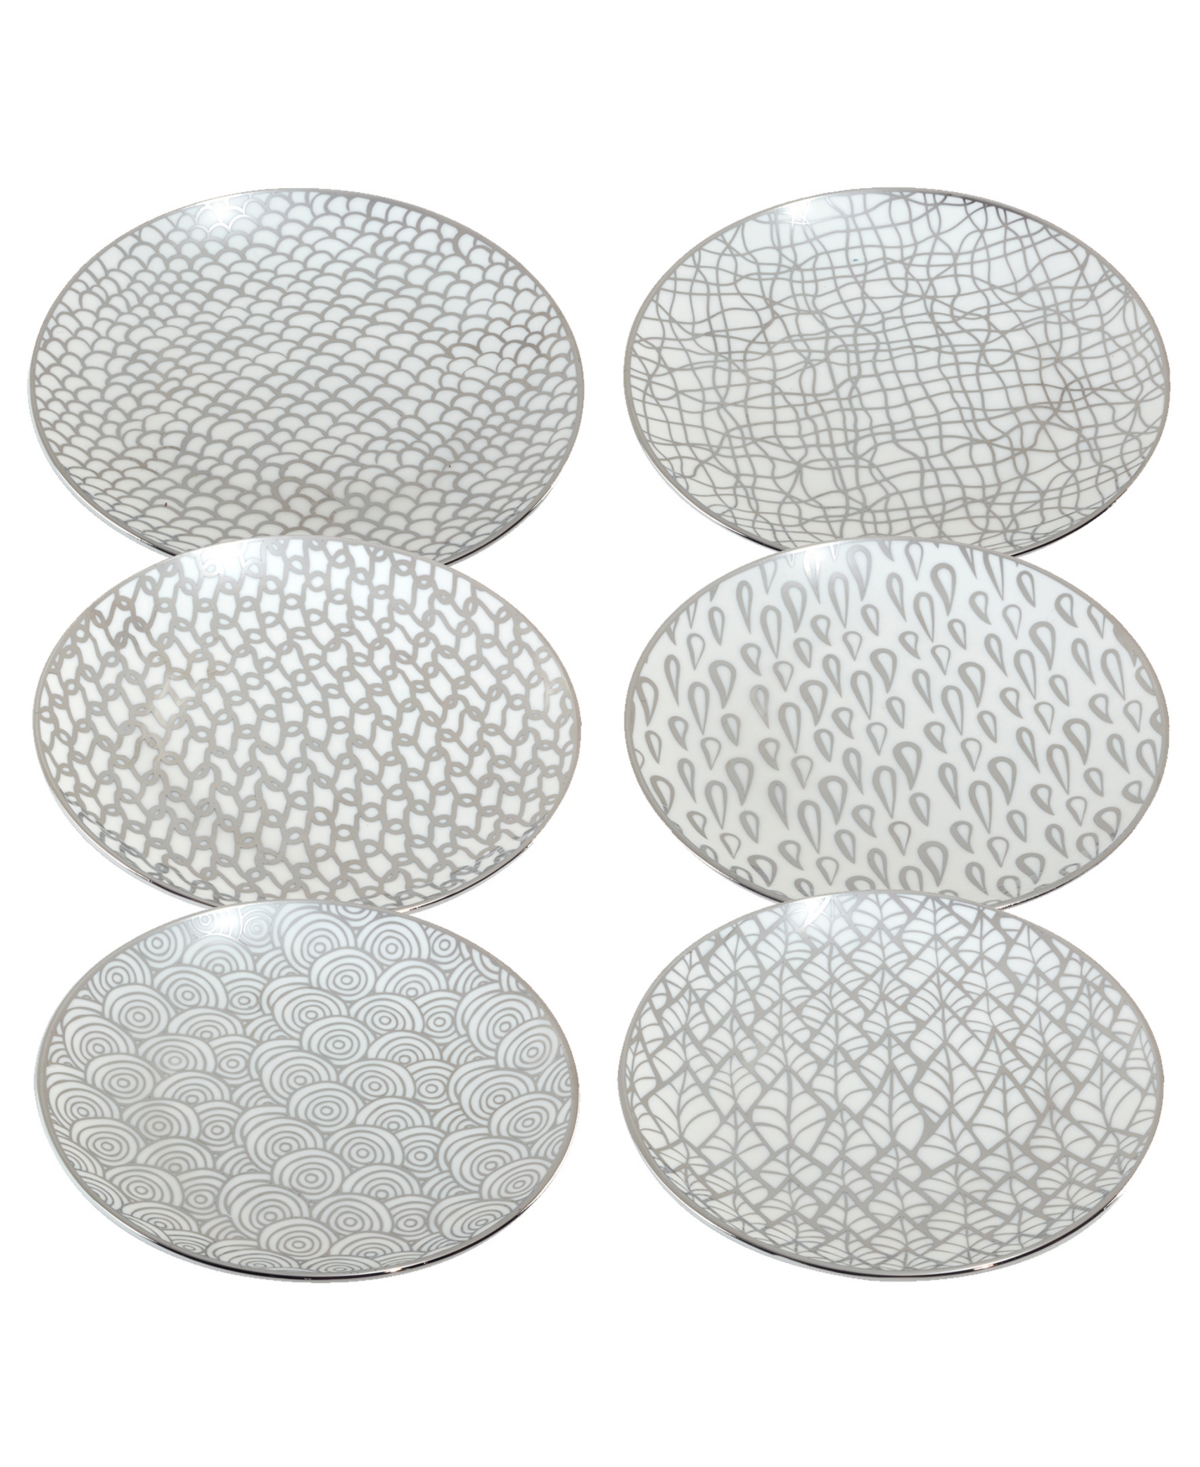 Mosaic Gold- Silver Tone Canape Plates Set of 6 - Silver